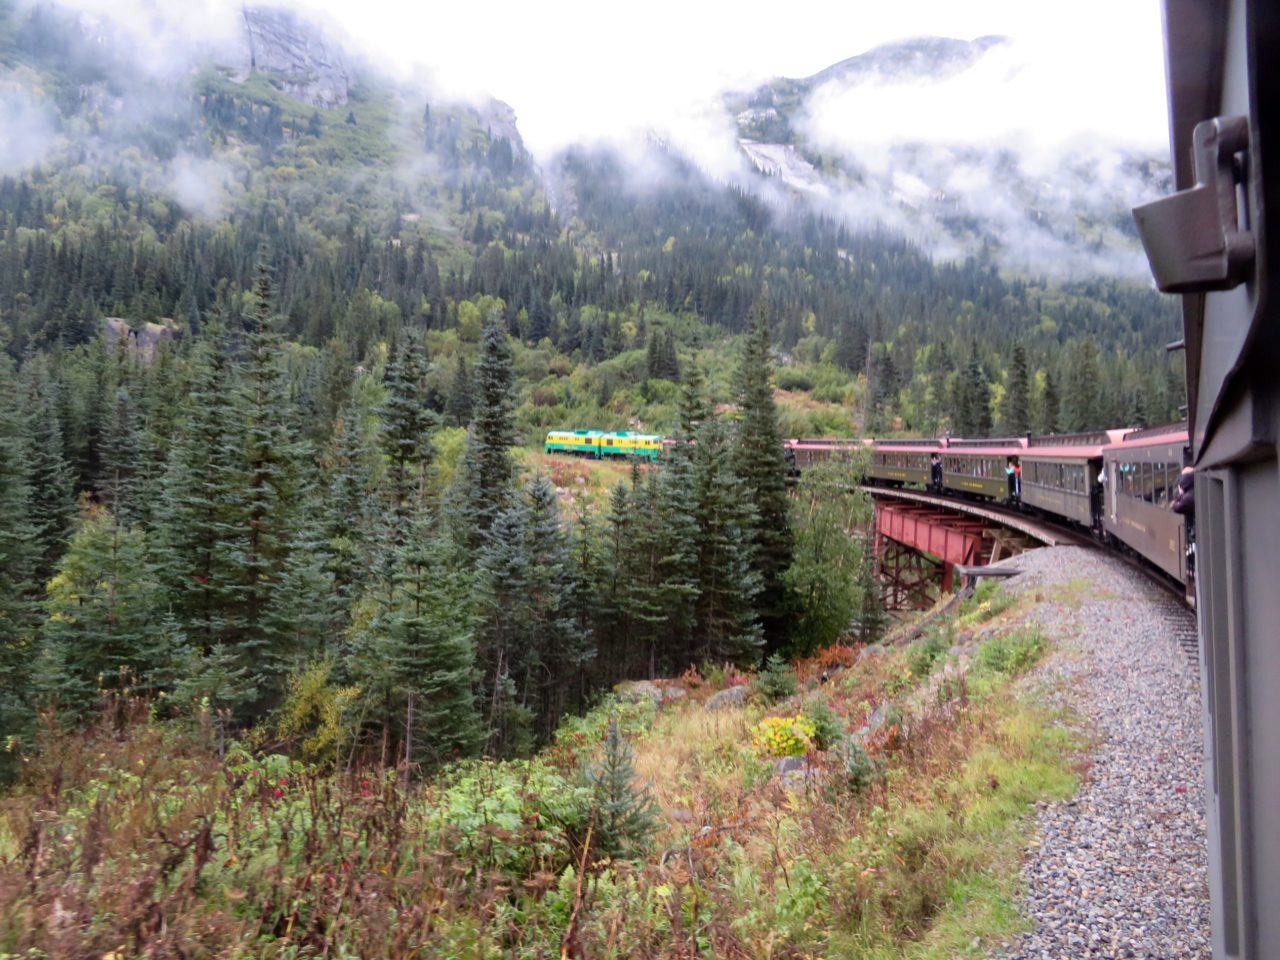 Aboard the scenic White Pass and Yukon Route Railroad during our Alaska Cruise with Princess Cruises